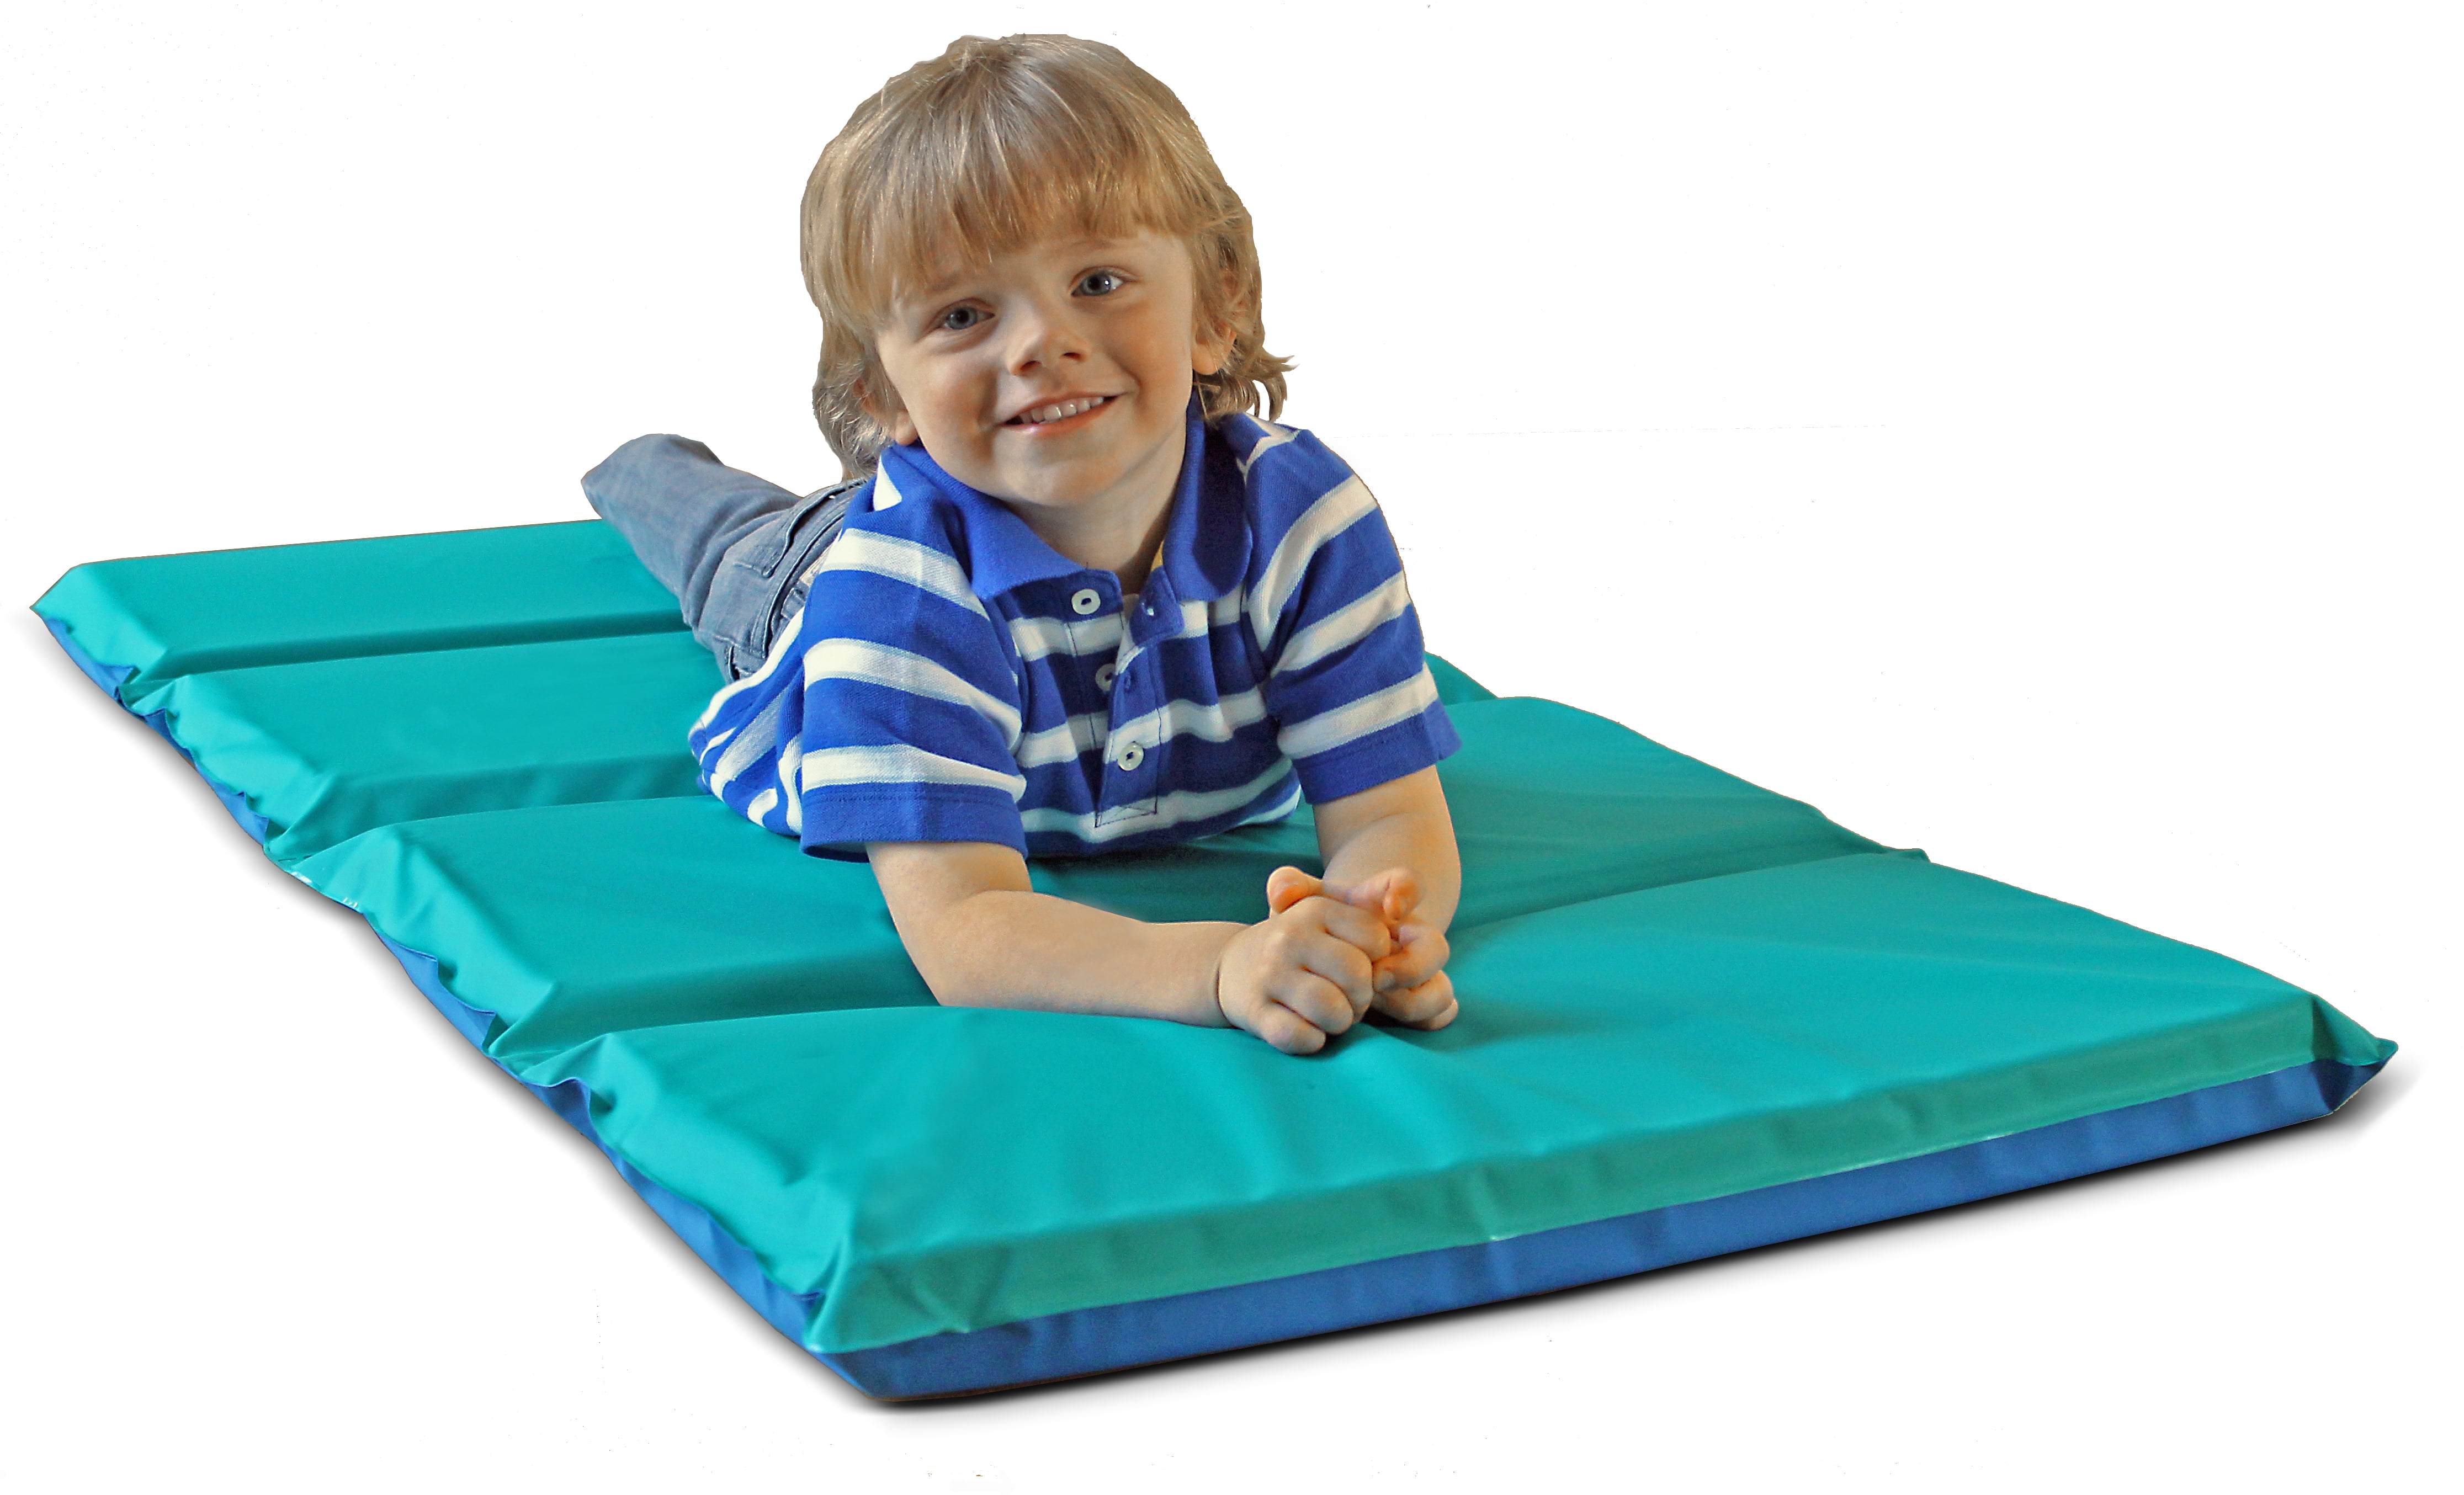 AS IS New KinderMat Sleeping & Exercise Mat 1"x19"x45" 